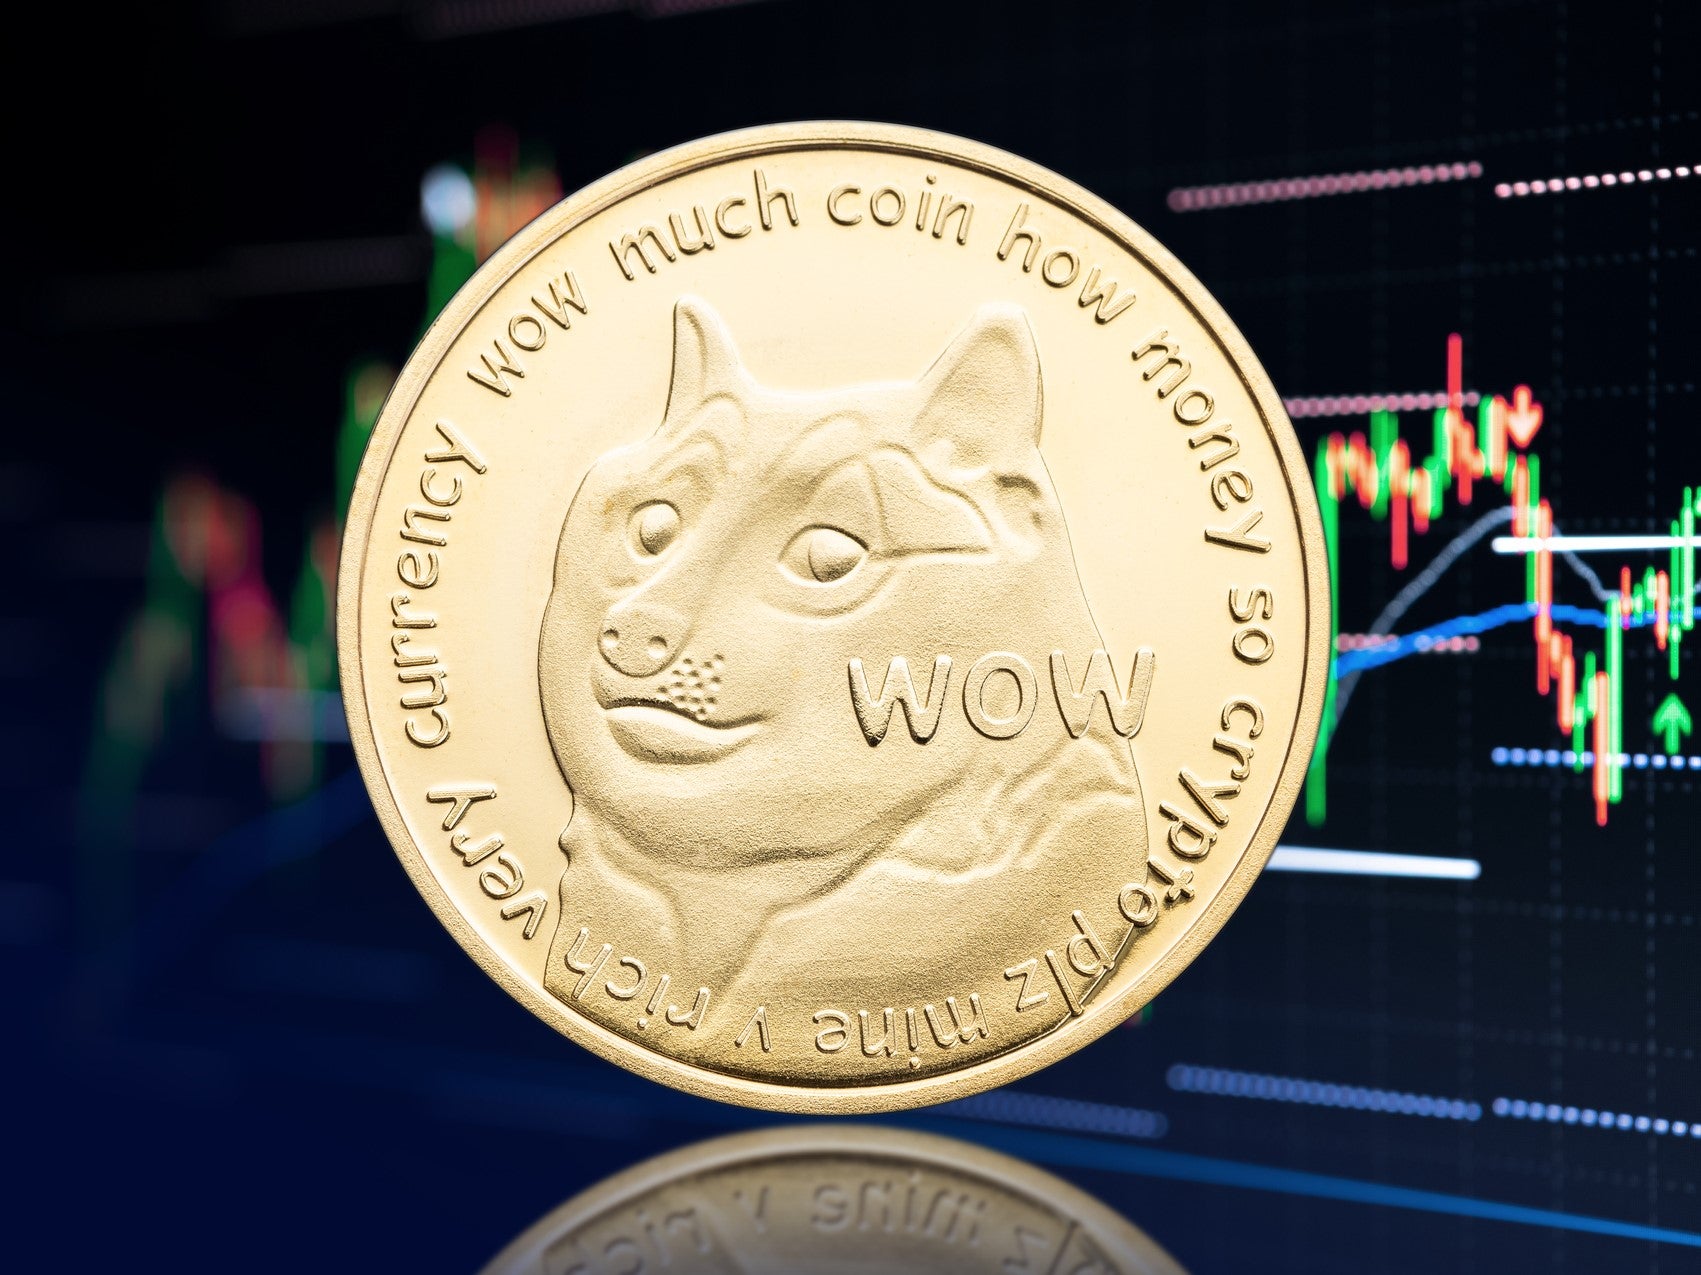 The price of dogecoin shot up by nearly 10 per cent on 1 July after Elon Musk tweeted about the cryptocurrency